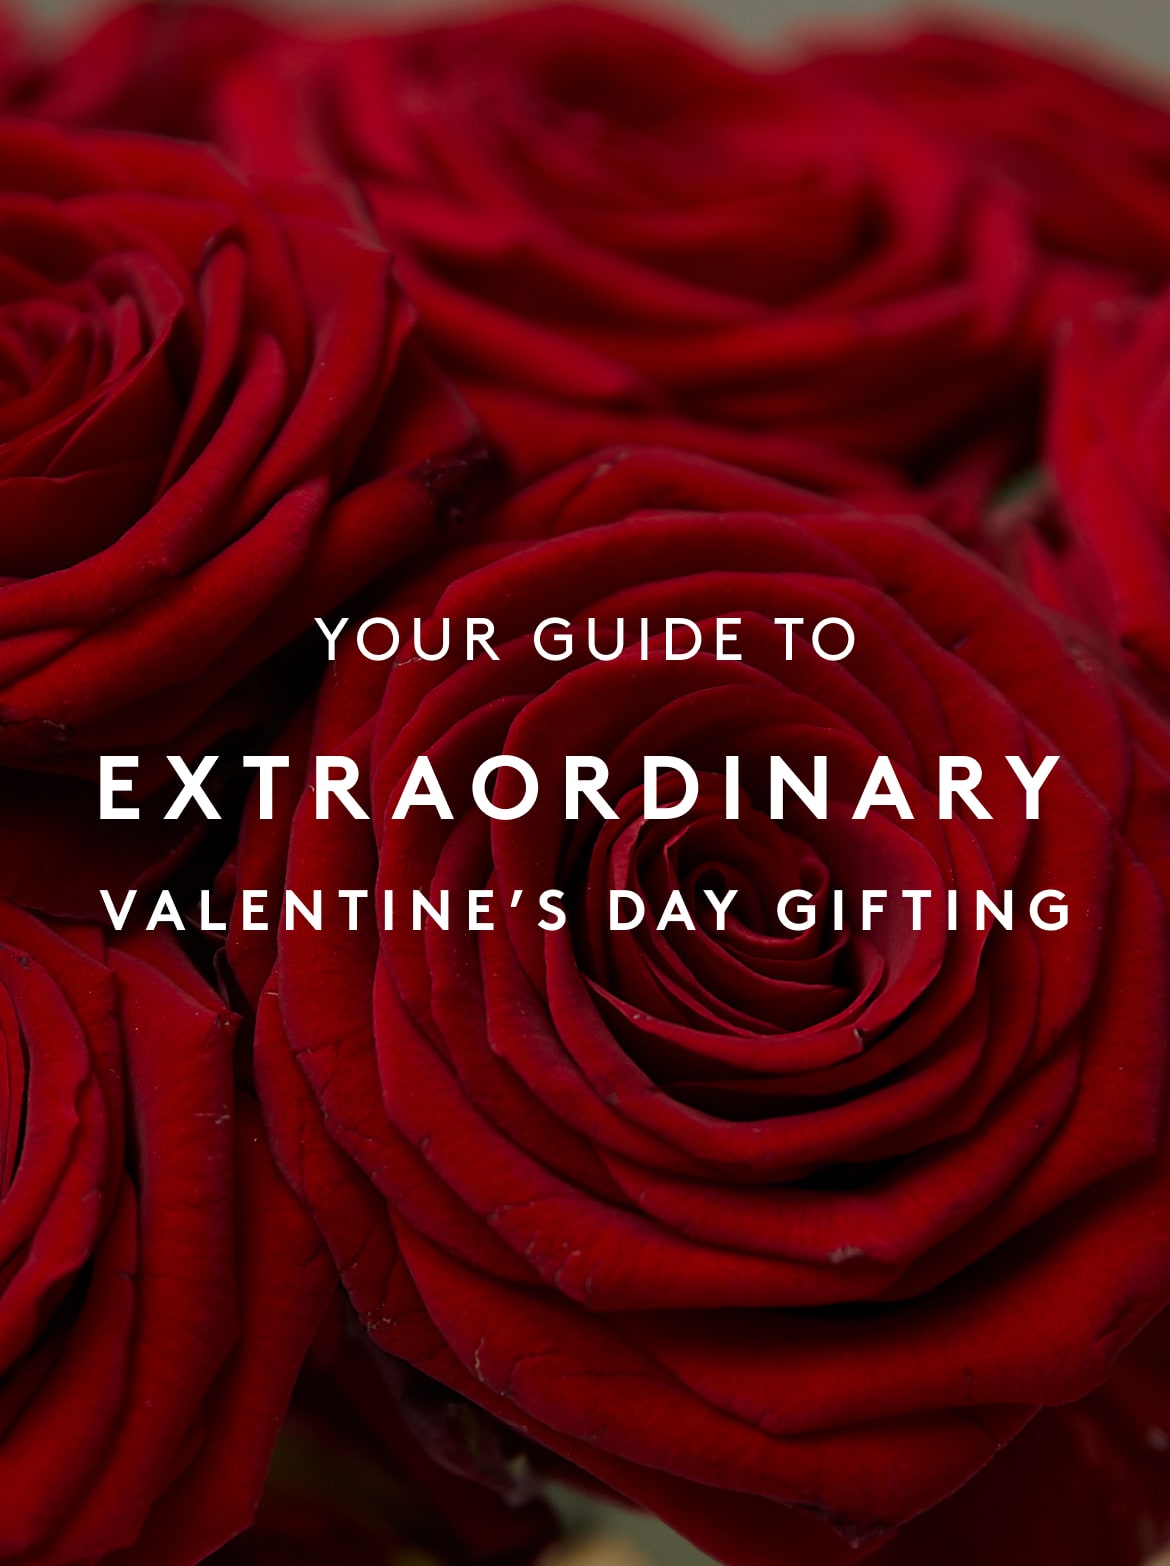 Your Guide to Extraordinary Valentine's Day Gifting